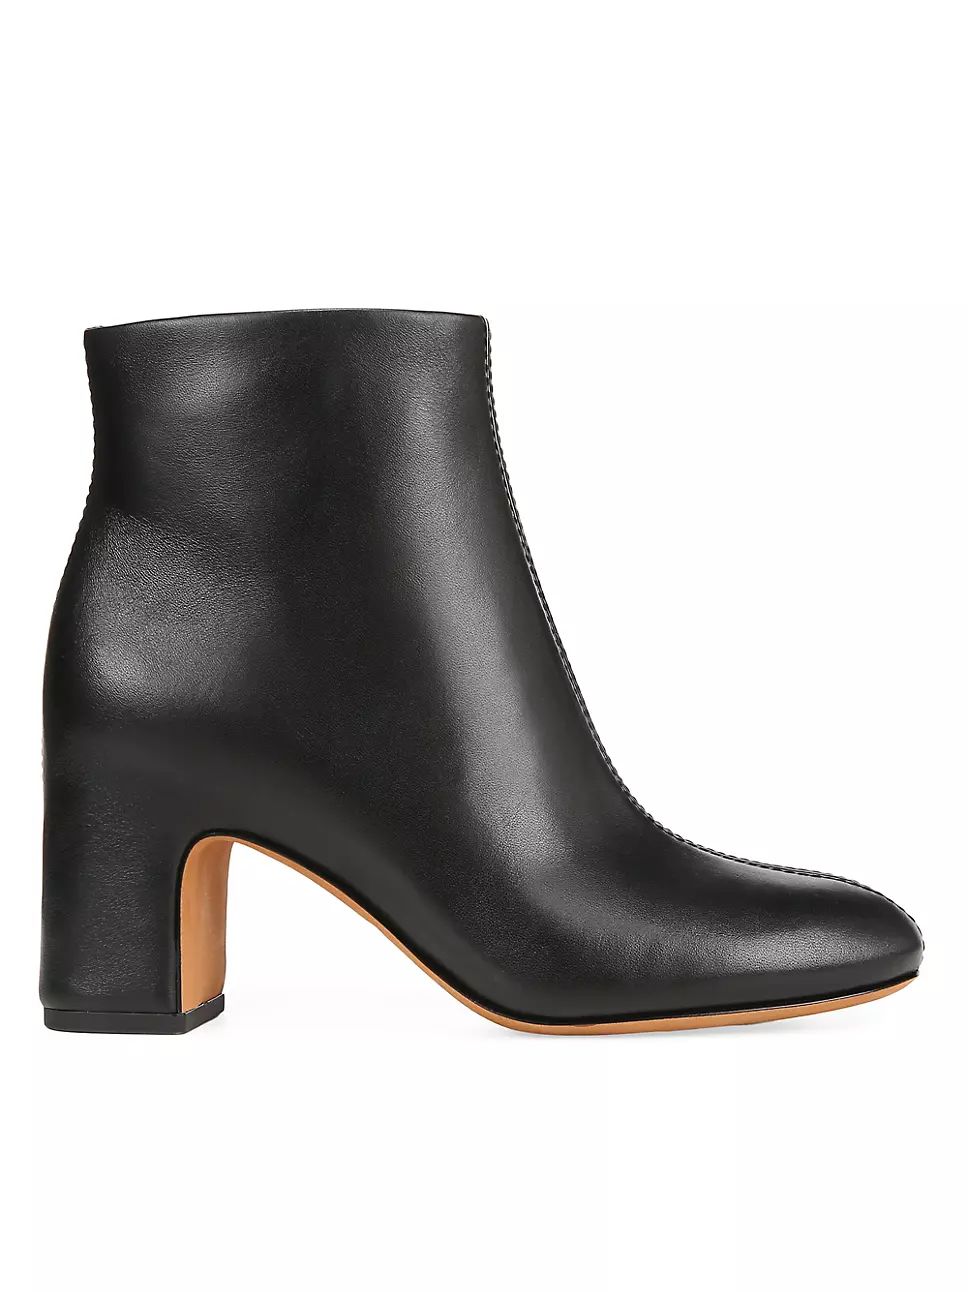 Terri 70MM Leather Ankle Booties | Saks Fifth Avenue